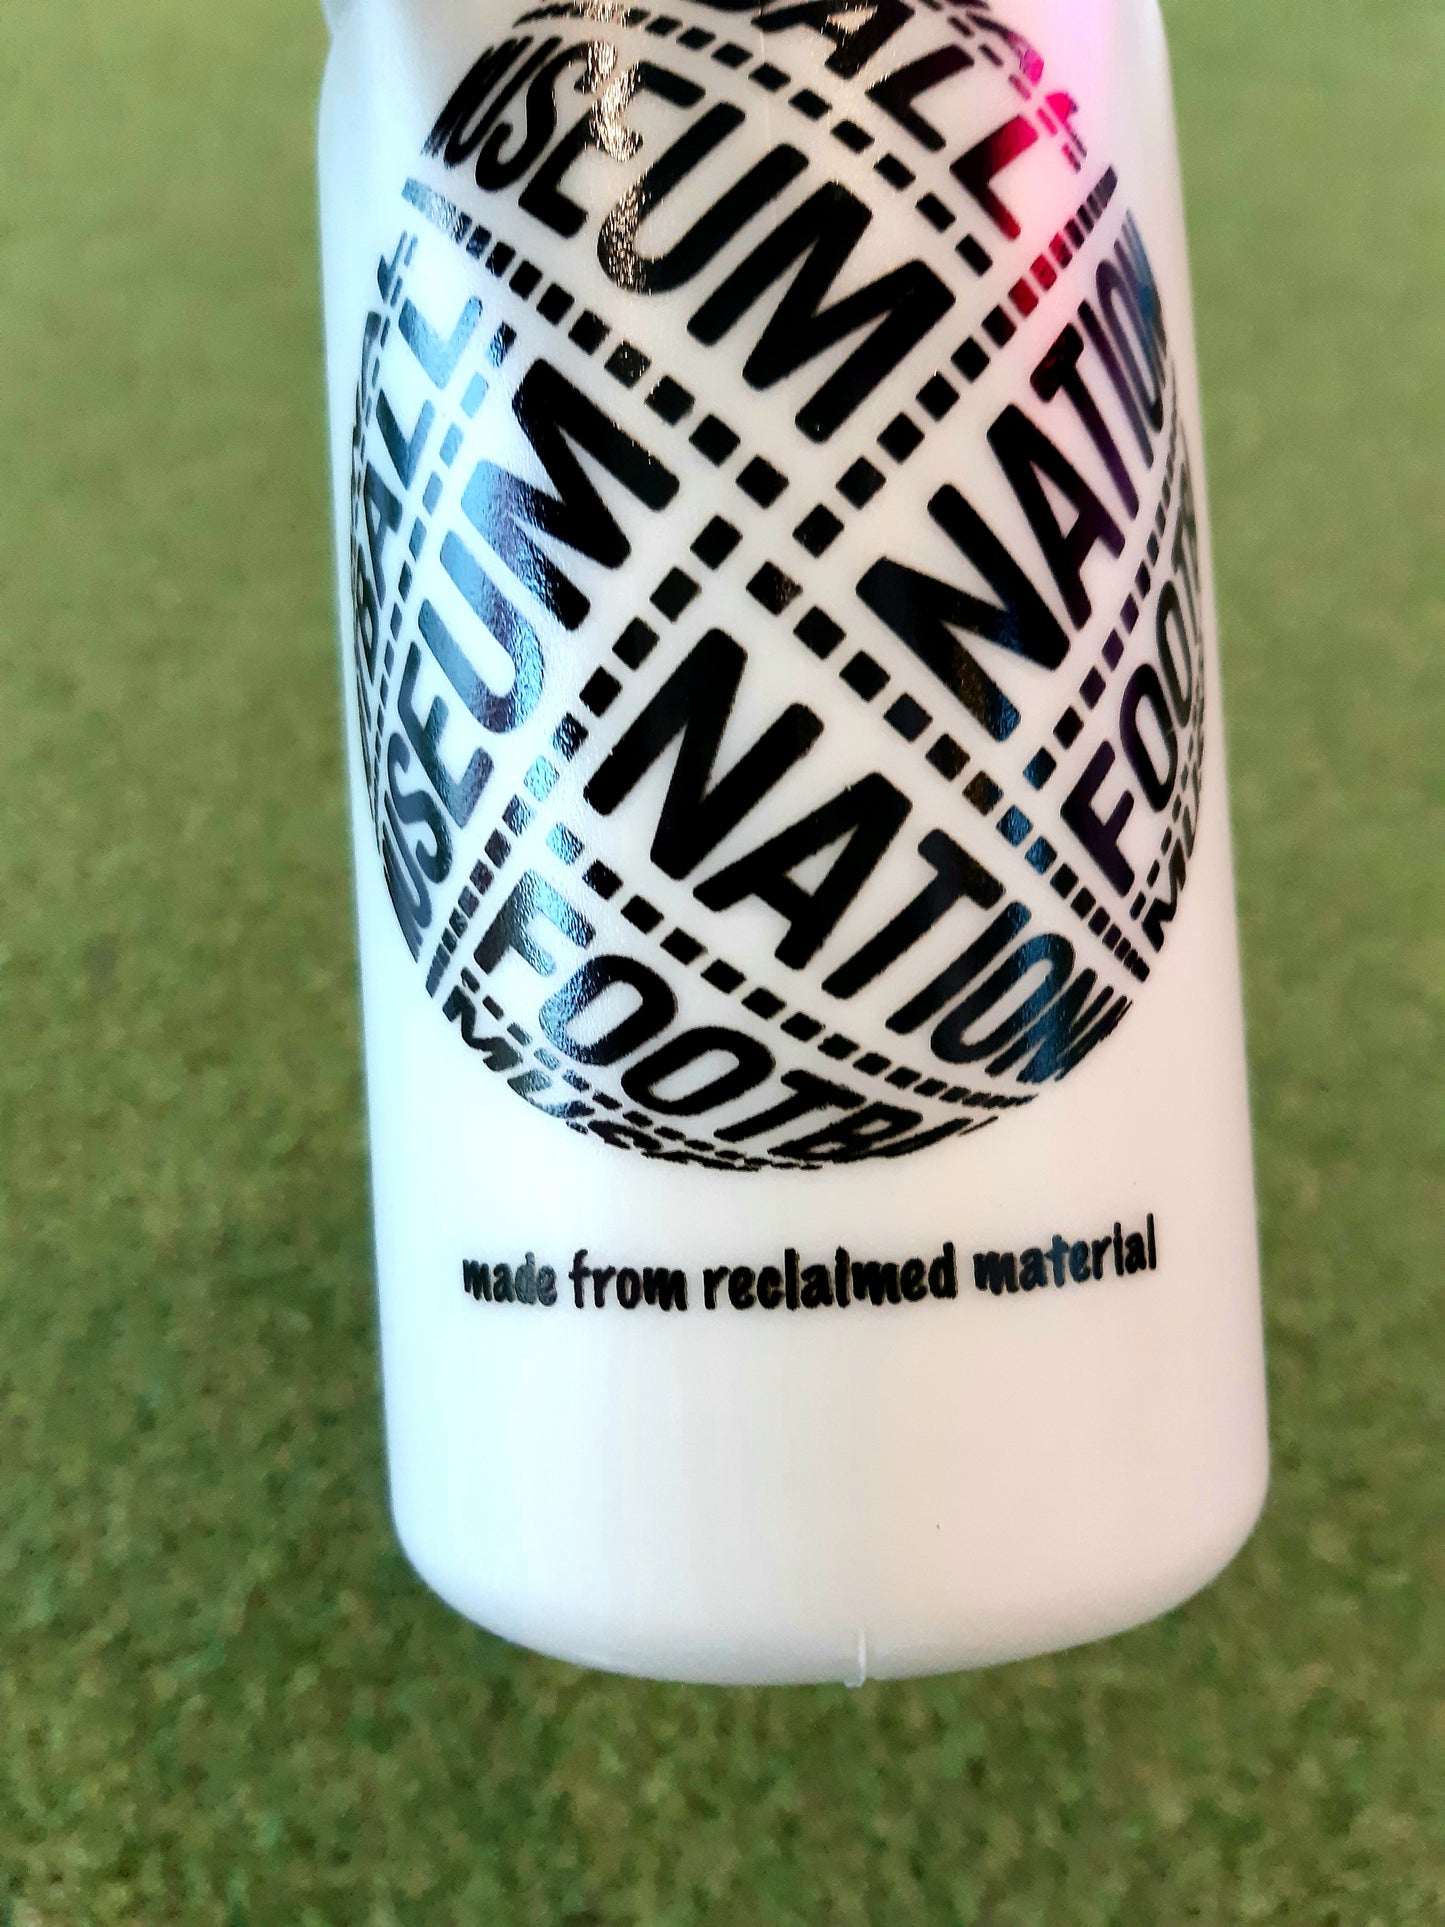 National Football Museum Recycled Water Bottle